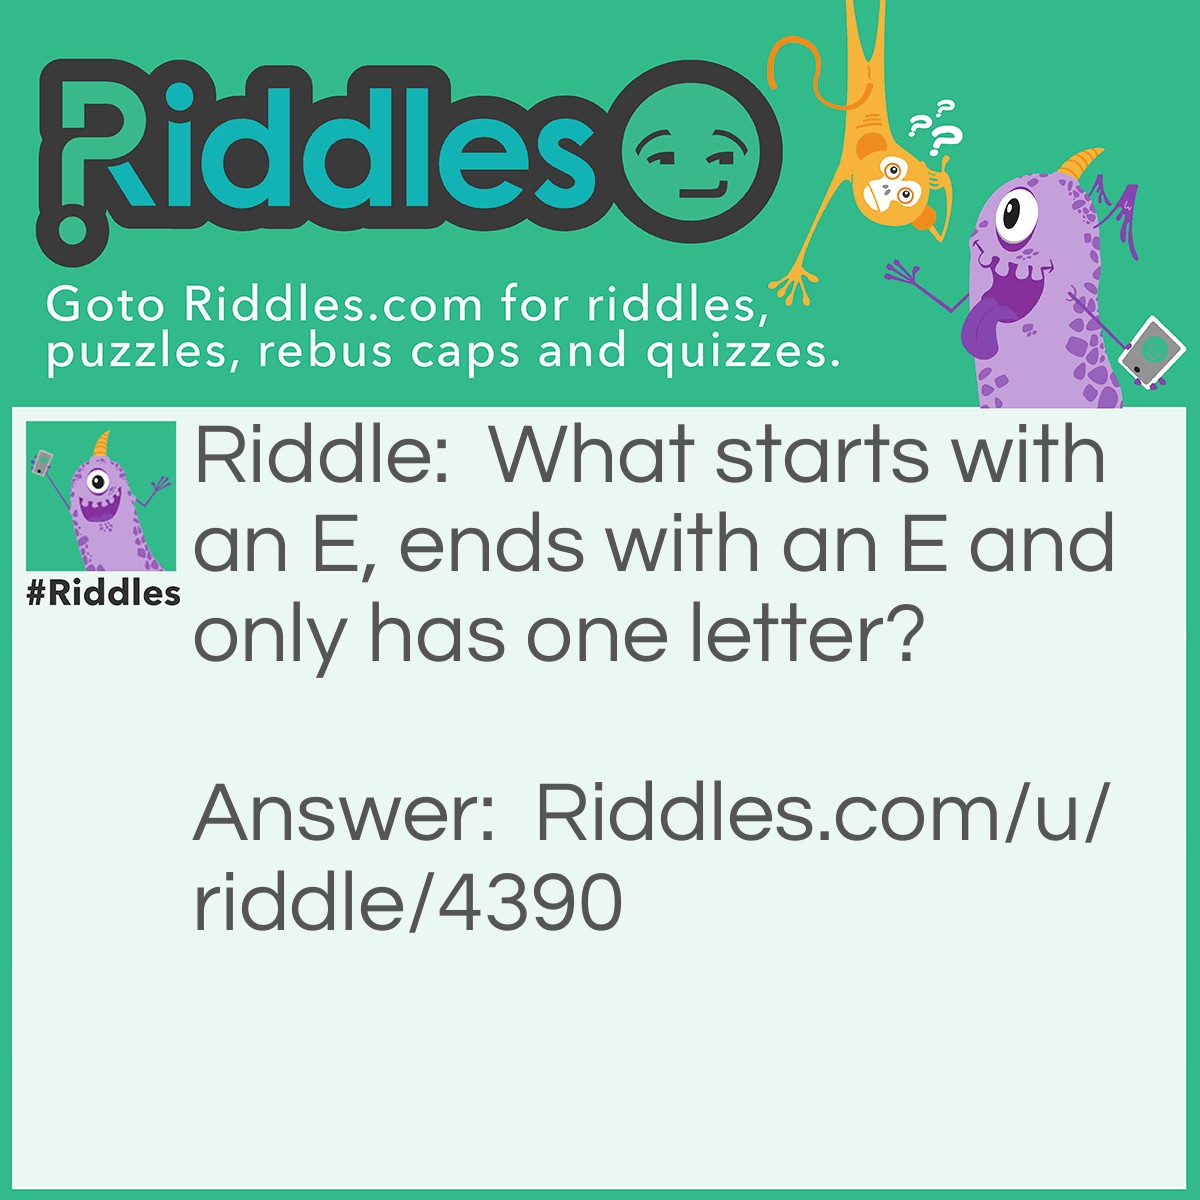 Riddle: What starts with an E, ends with an E and only has one letter? Answer: An envelope.